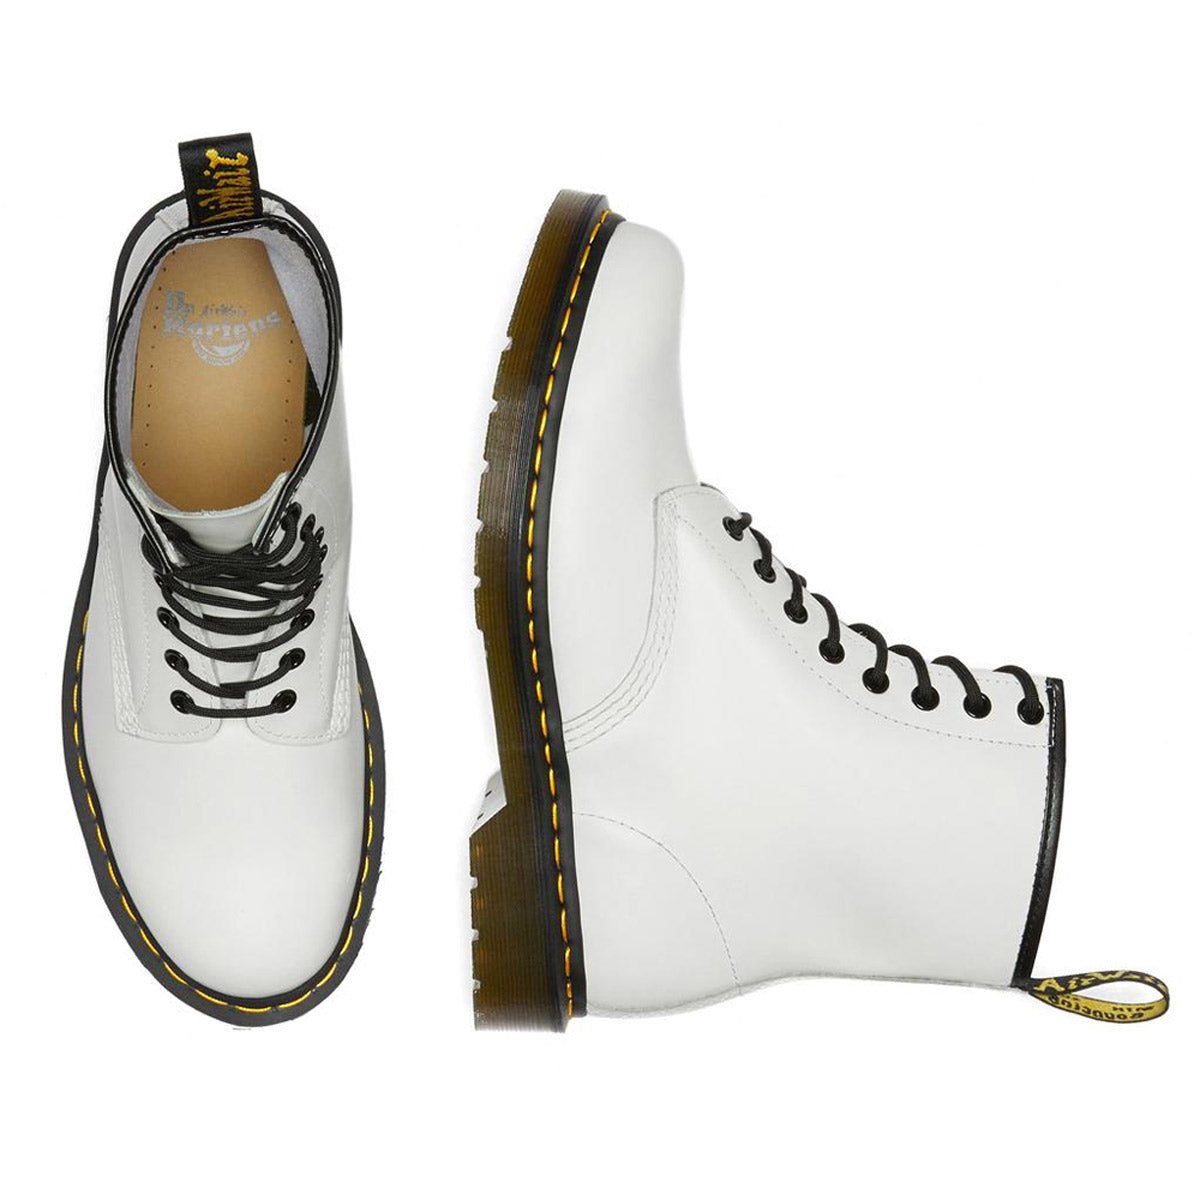 DR. MARTENS 1460 8 EYE WHITE SMOOTH - WOMENS